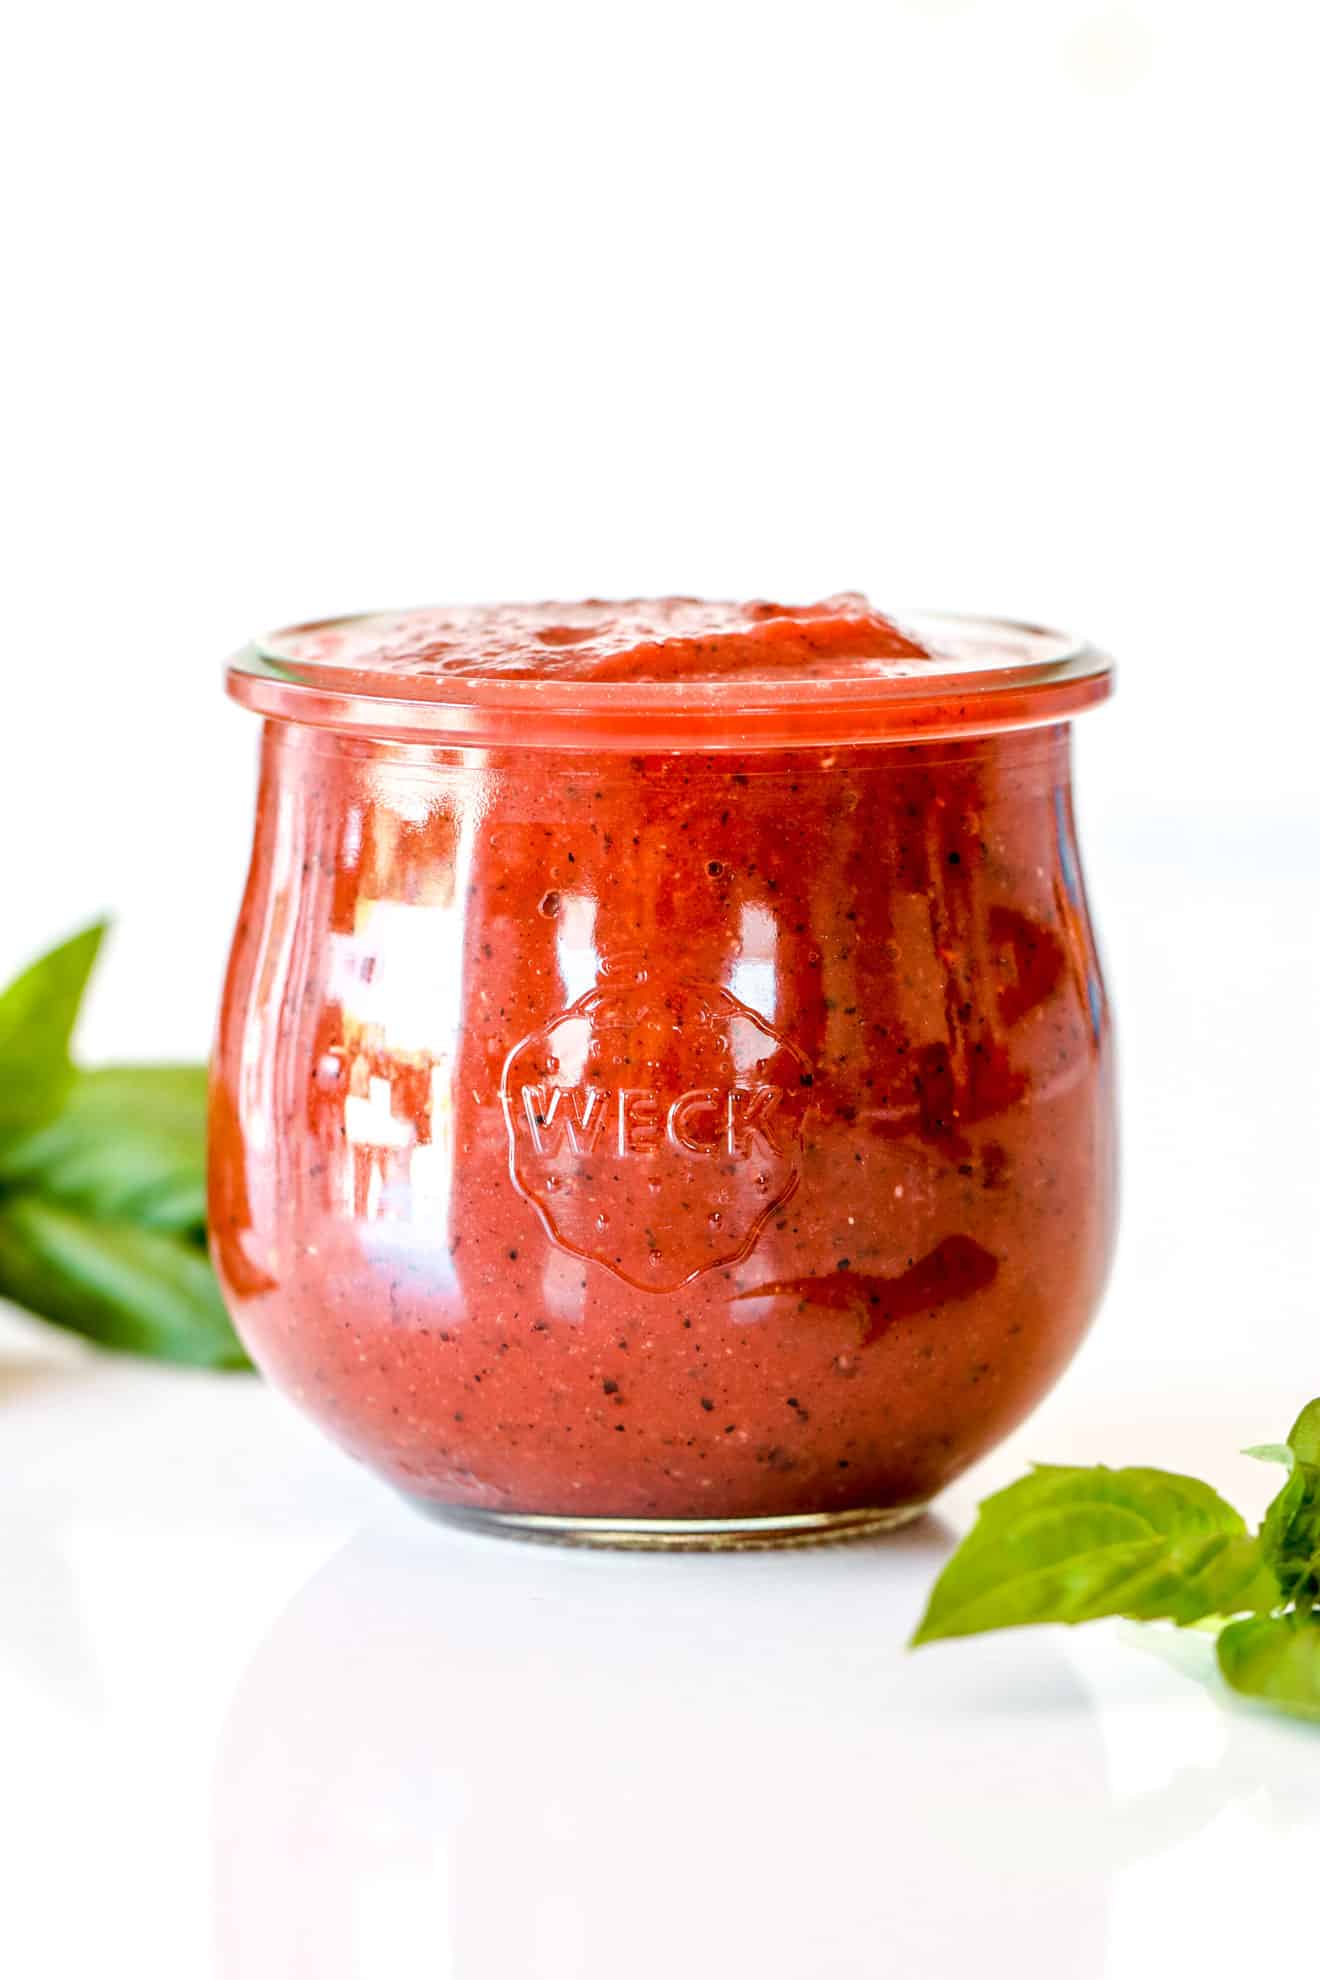 weck jar filled with homemade pizza sauce on white counter with basil leaves